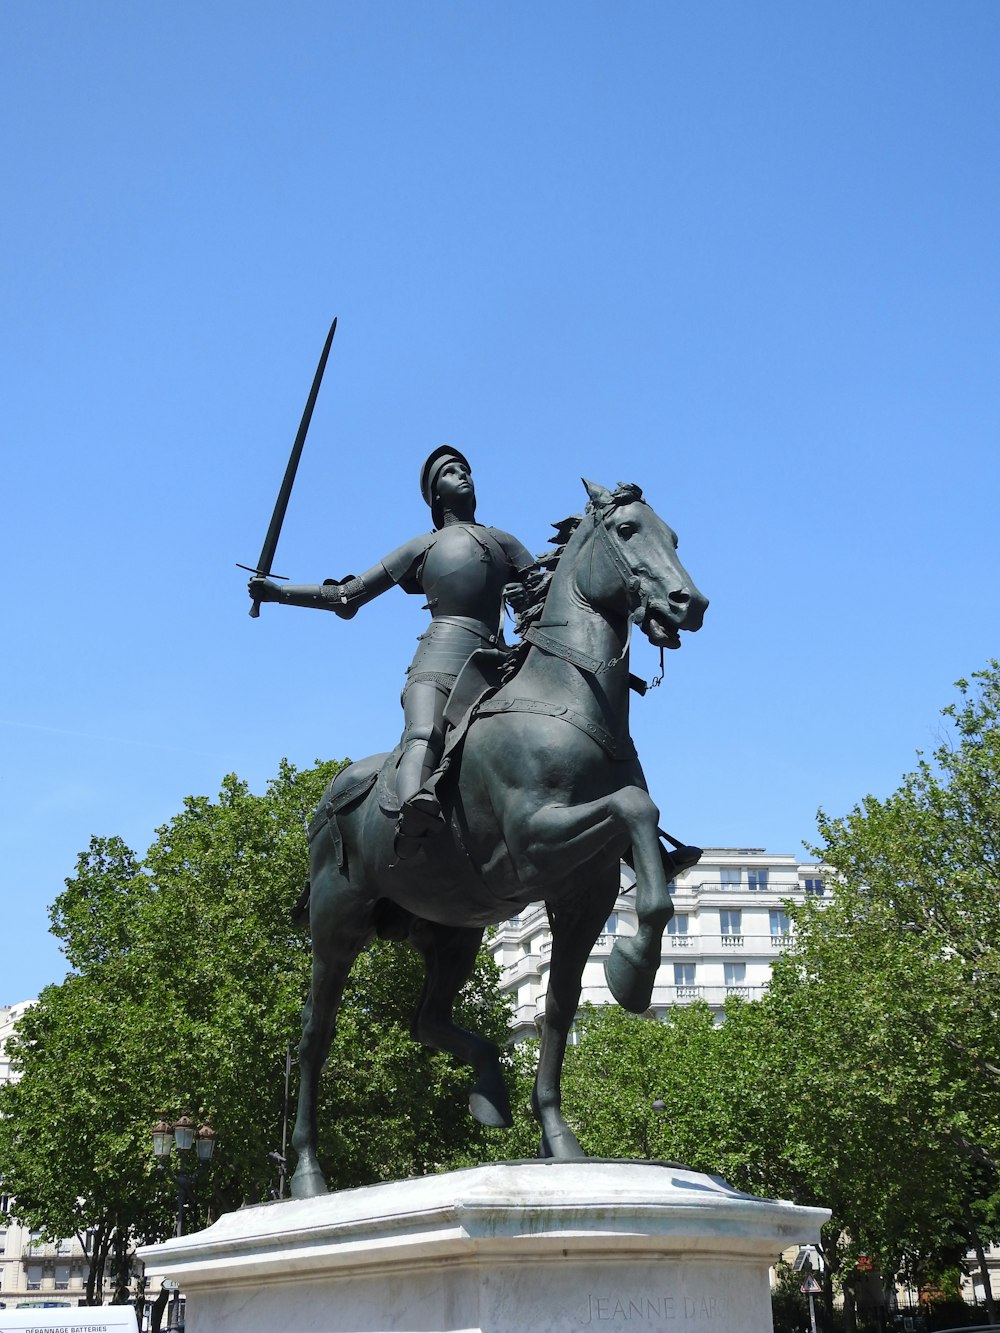 a statue of a man on a horse holding a sword